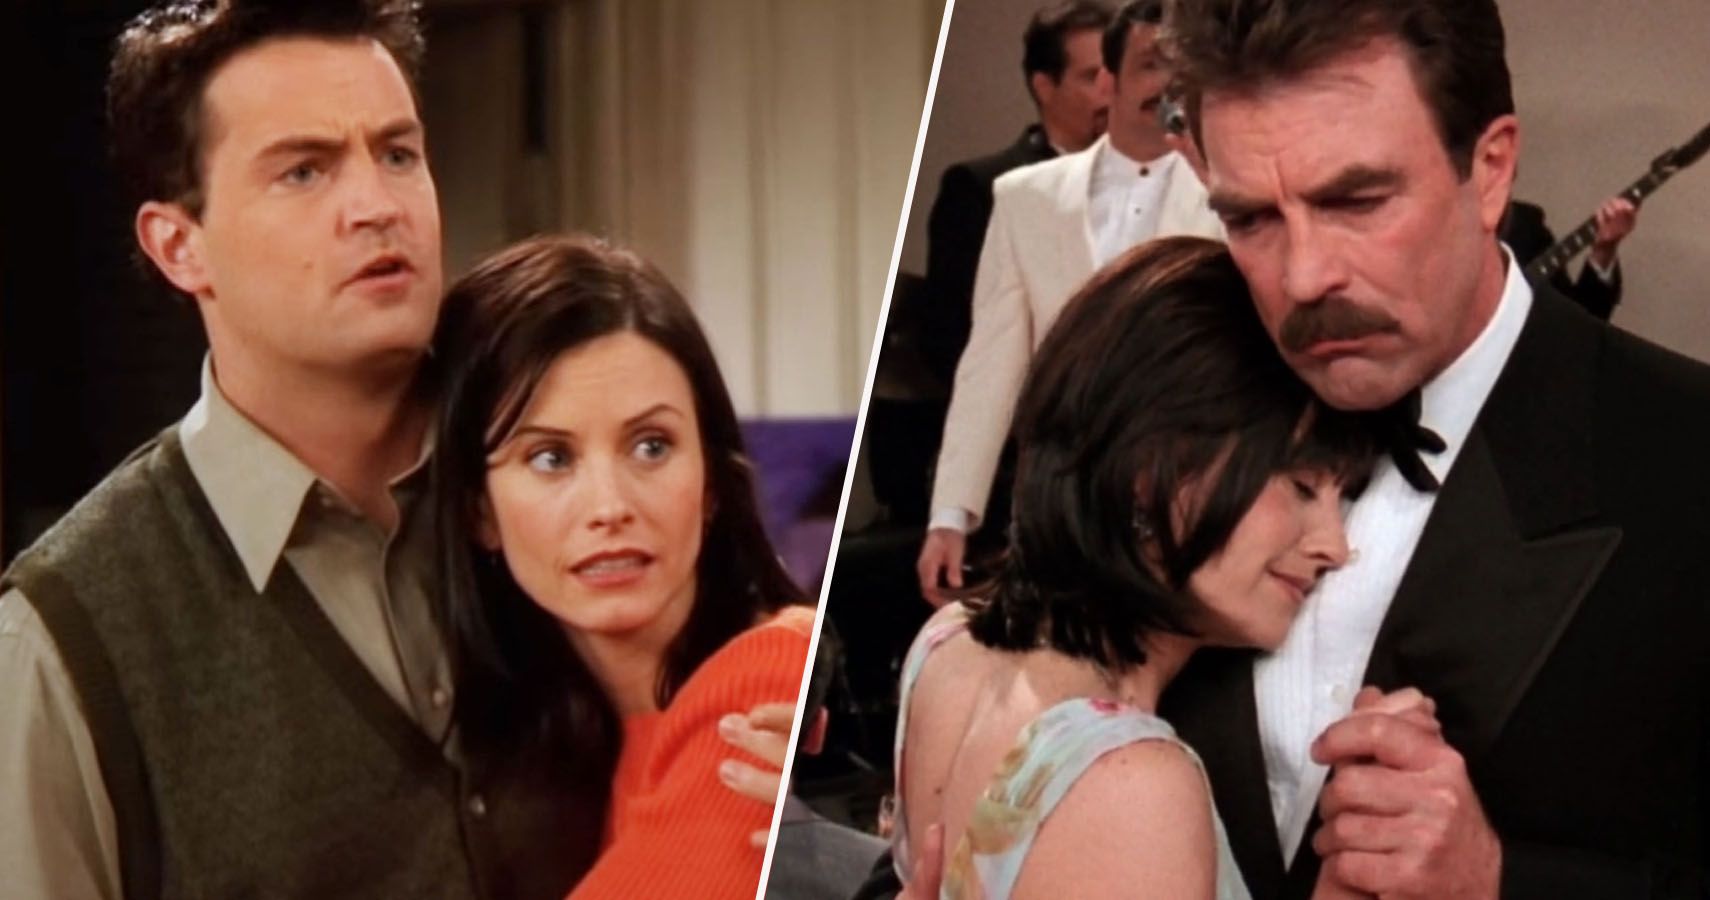 Unconventional Love Lessons from Monica and Chandler, by Thegiftio